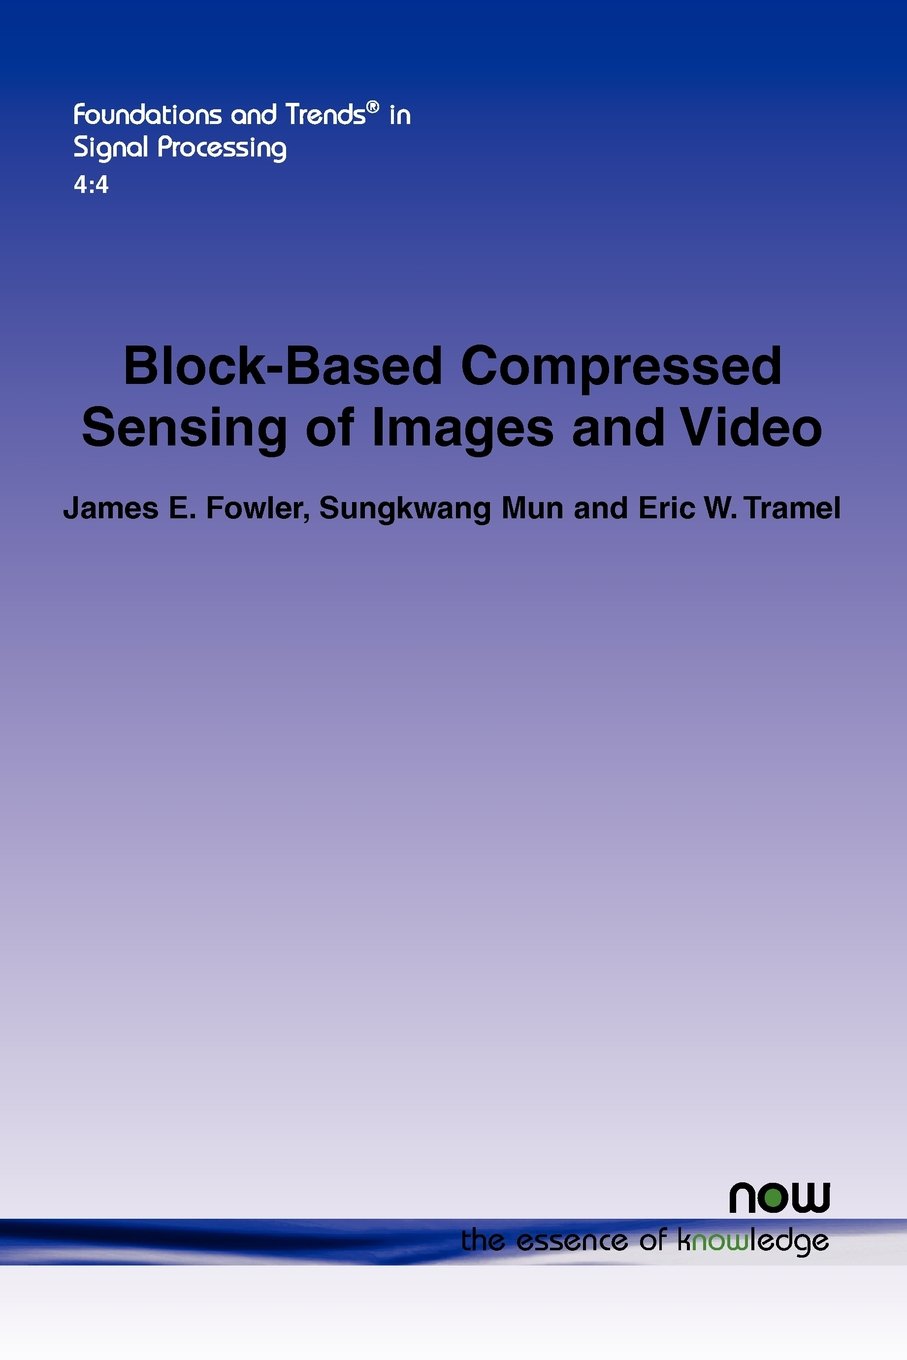 Block-based Compressed Sensing of Images and Video